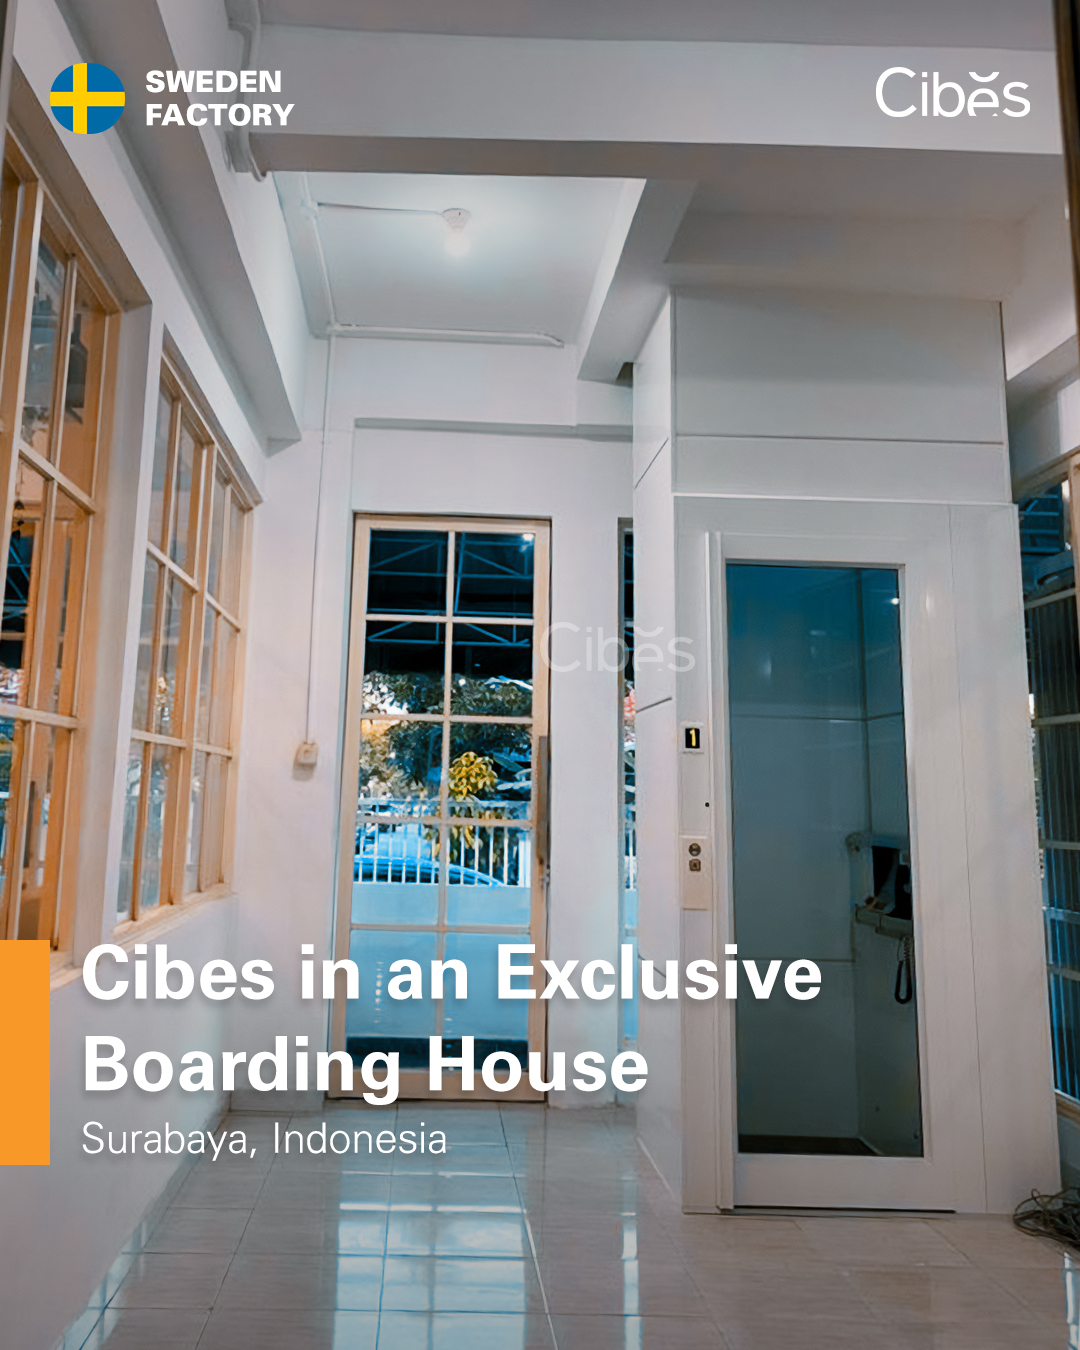 Cibes Classic in an Exclusive Boarding House